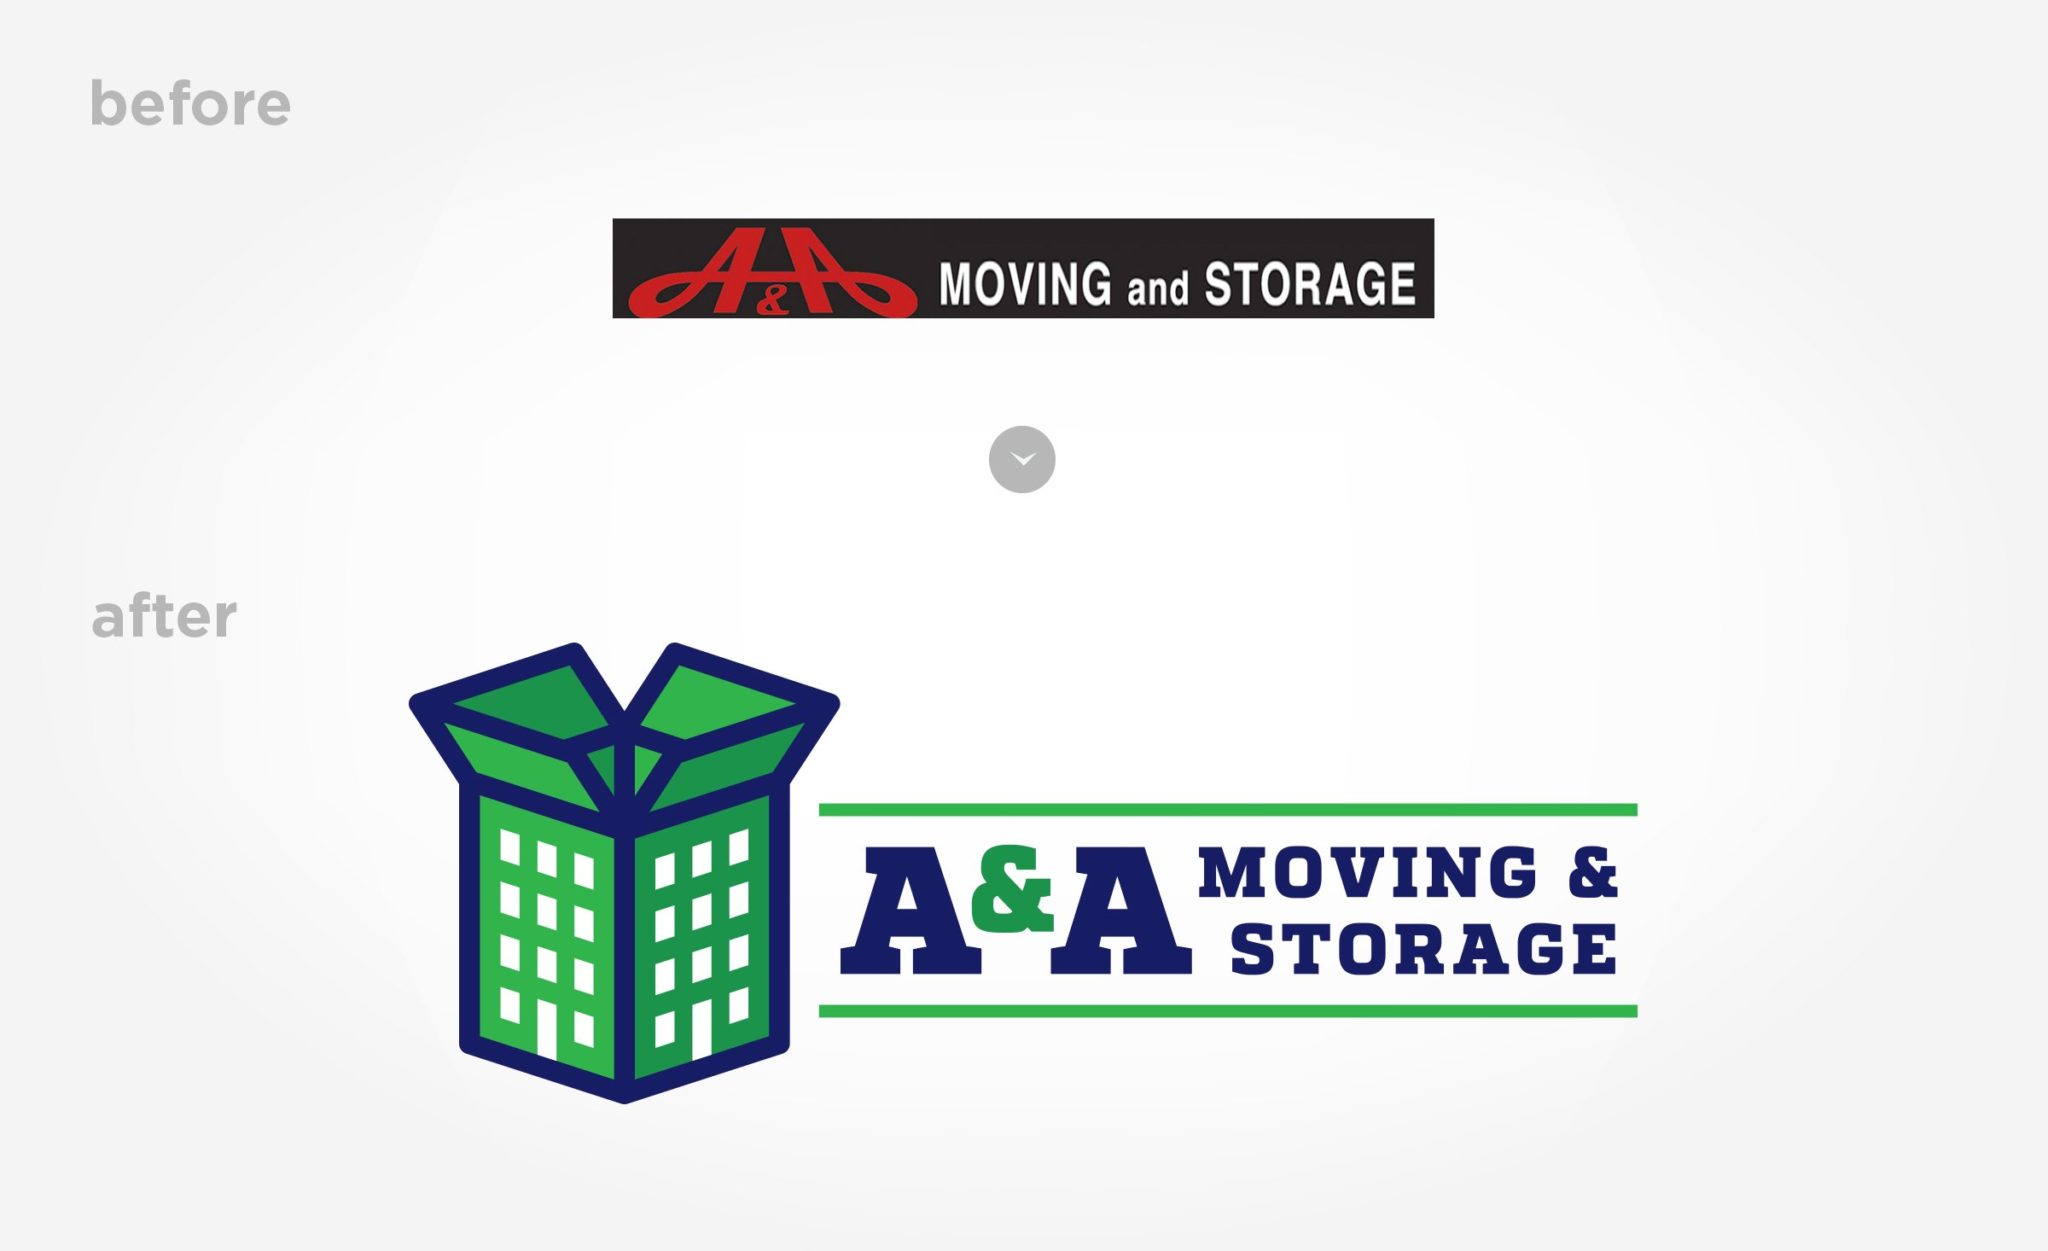 Before & after A&A Moving & Storage